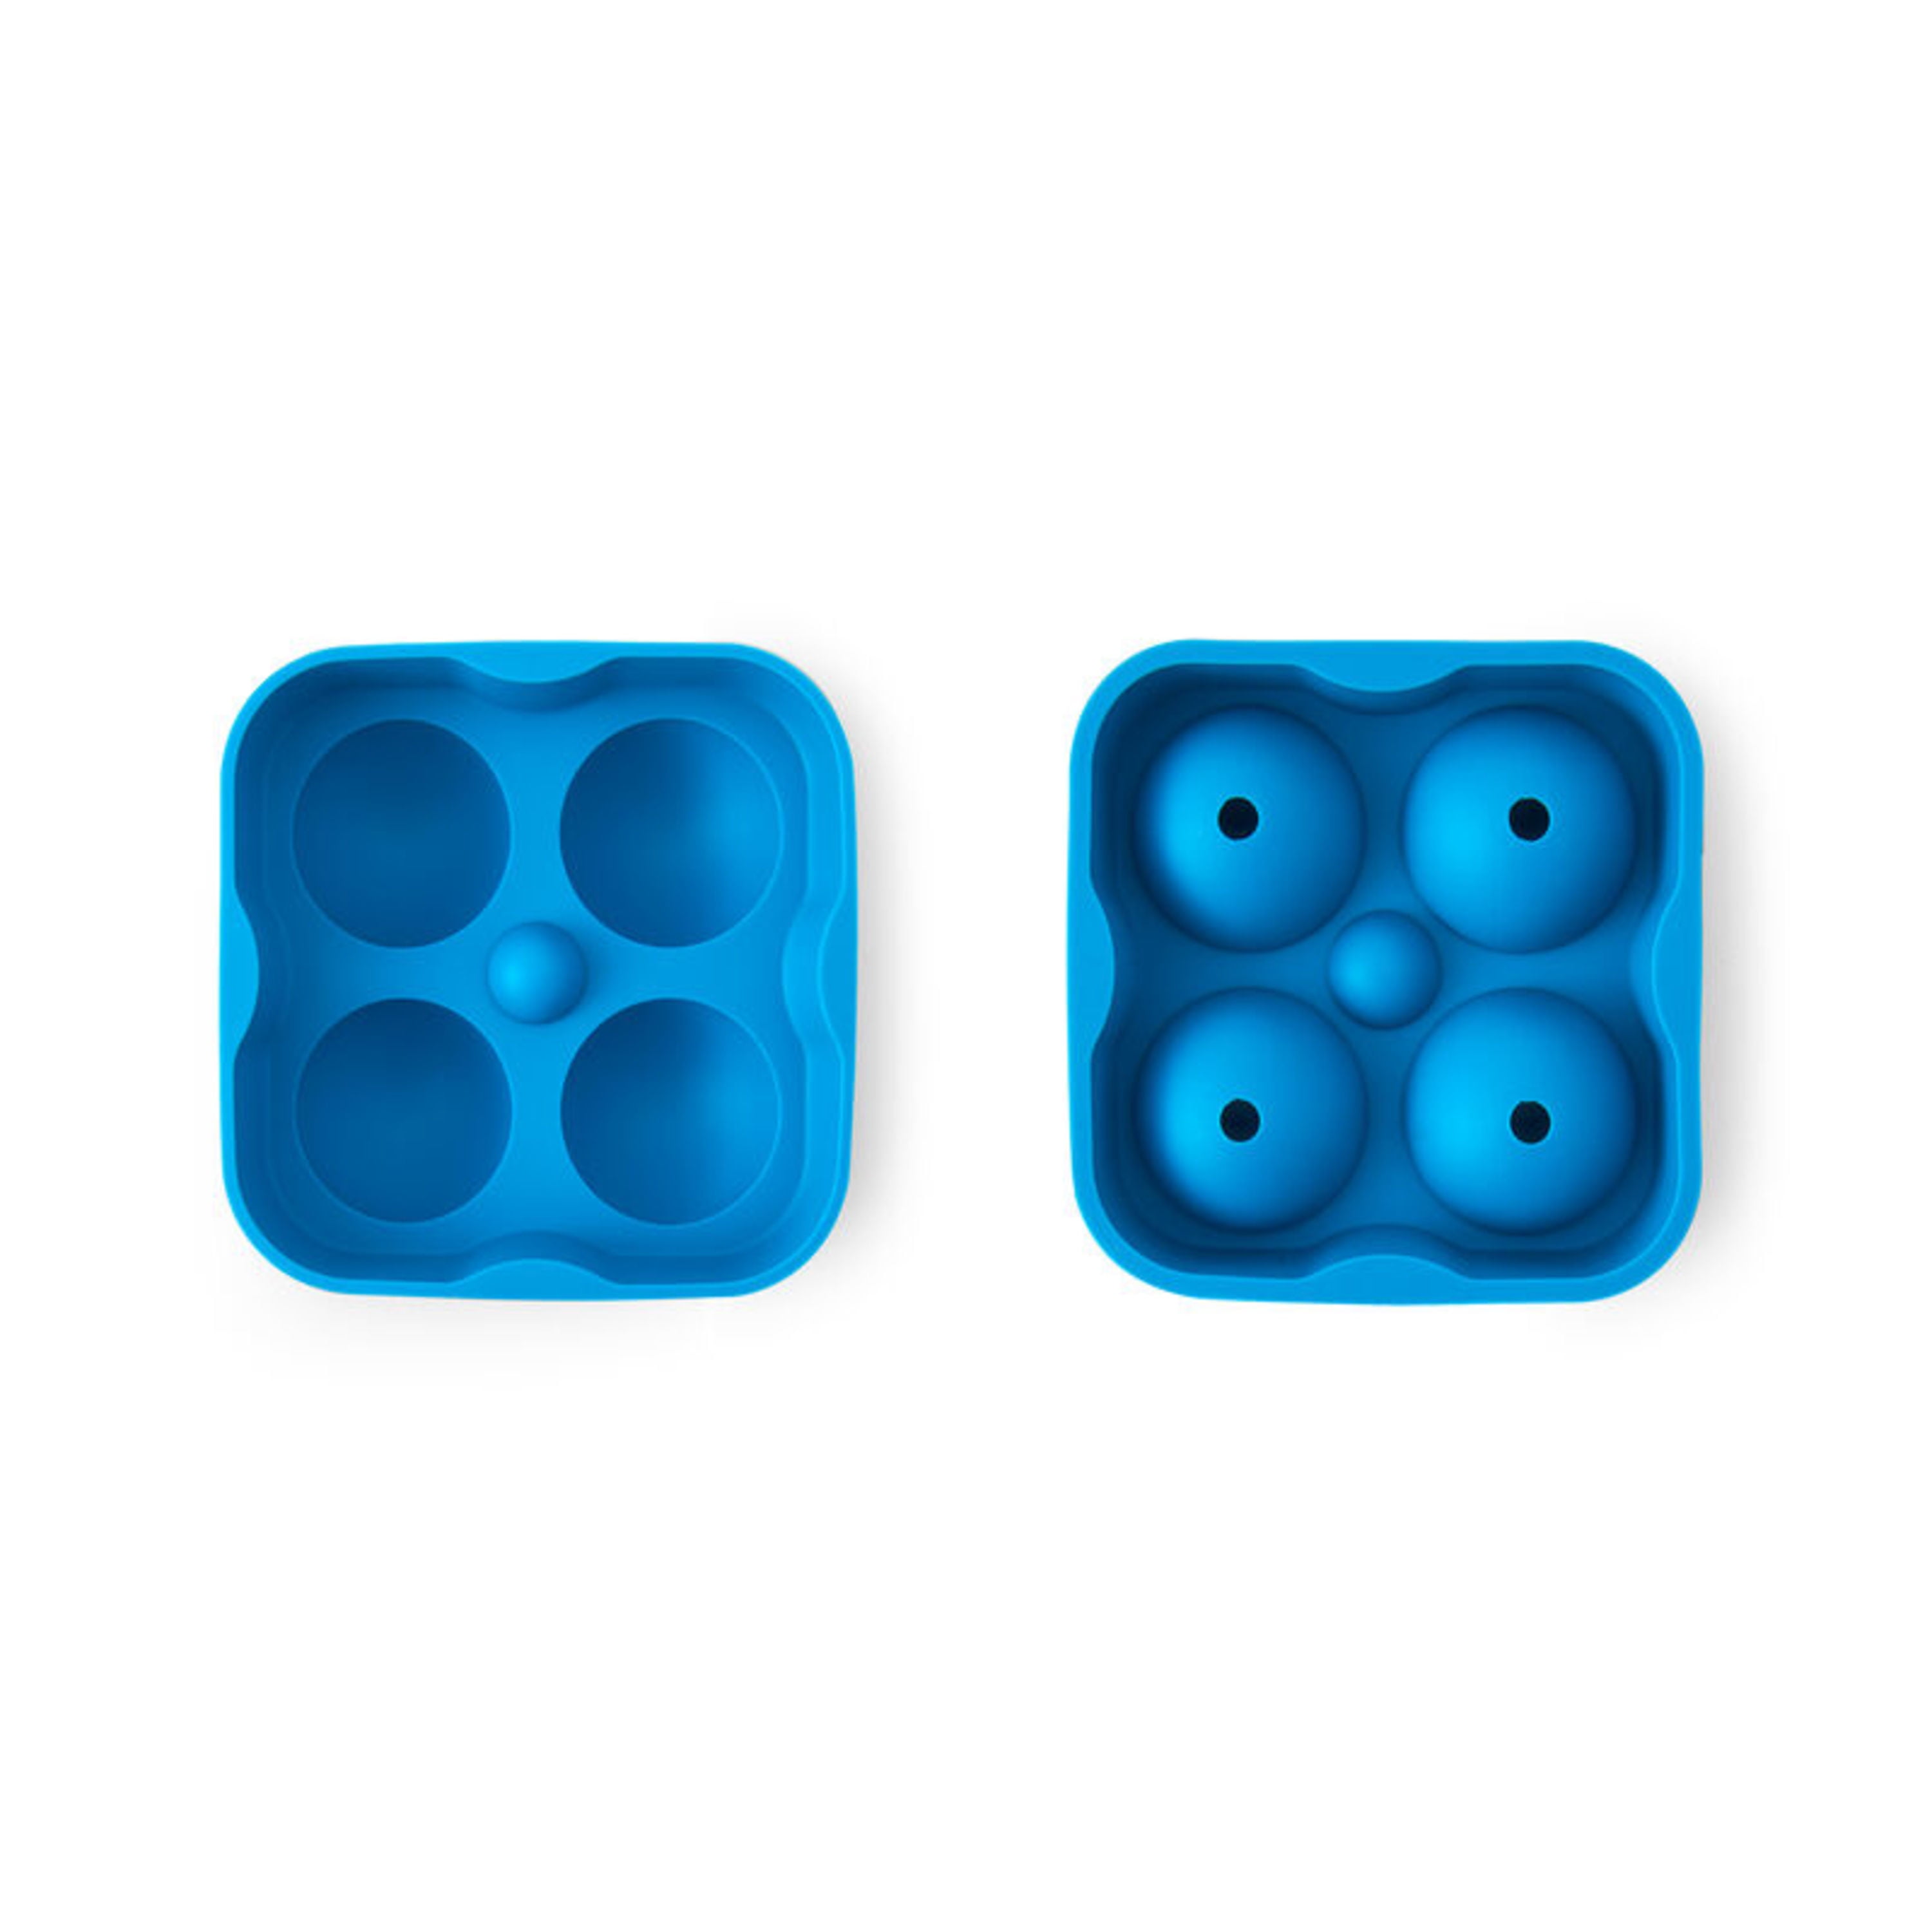 1Pc Ice Ball Maker Mold-Blue Silicone Ice Cube Tray for Star Wars